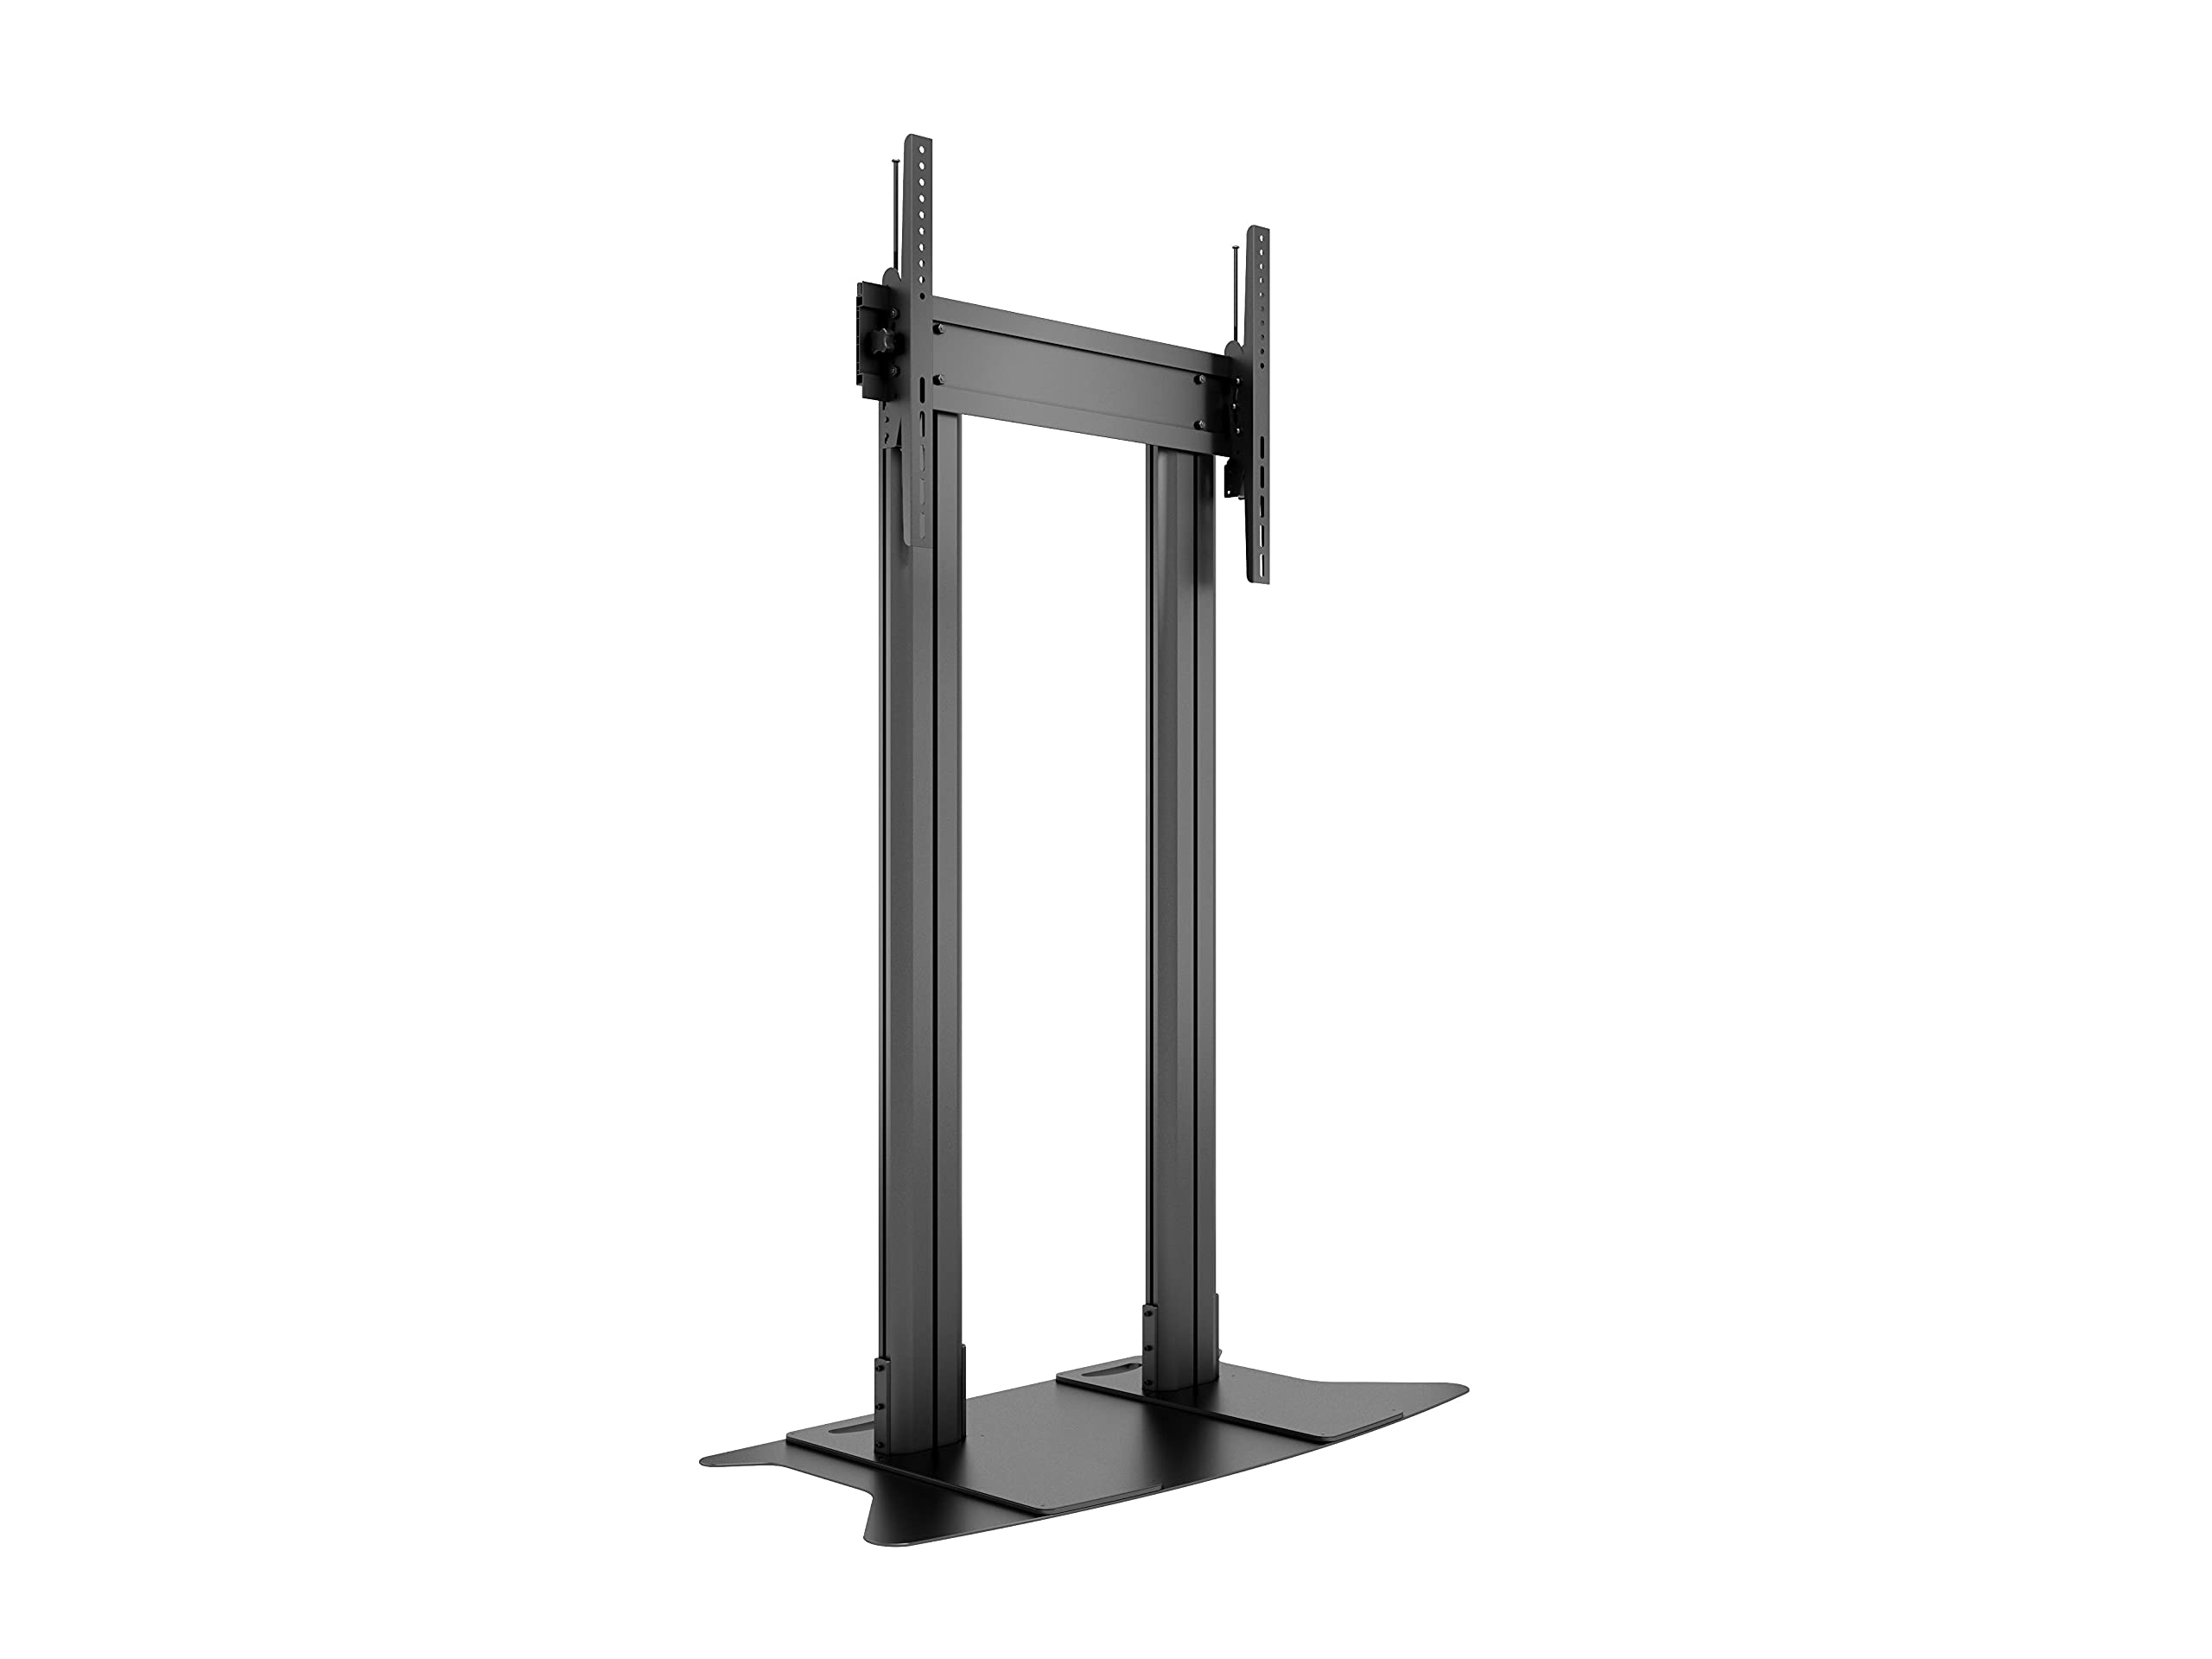 FLOOR STAND FOR MONITORS